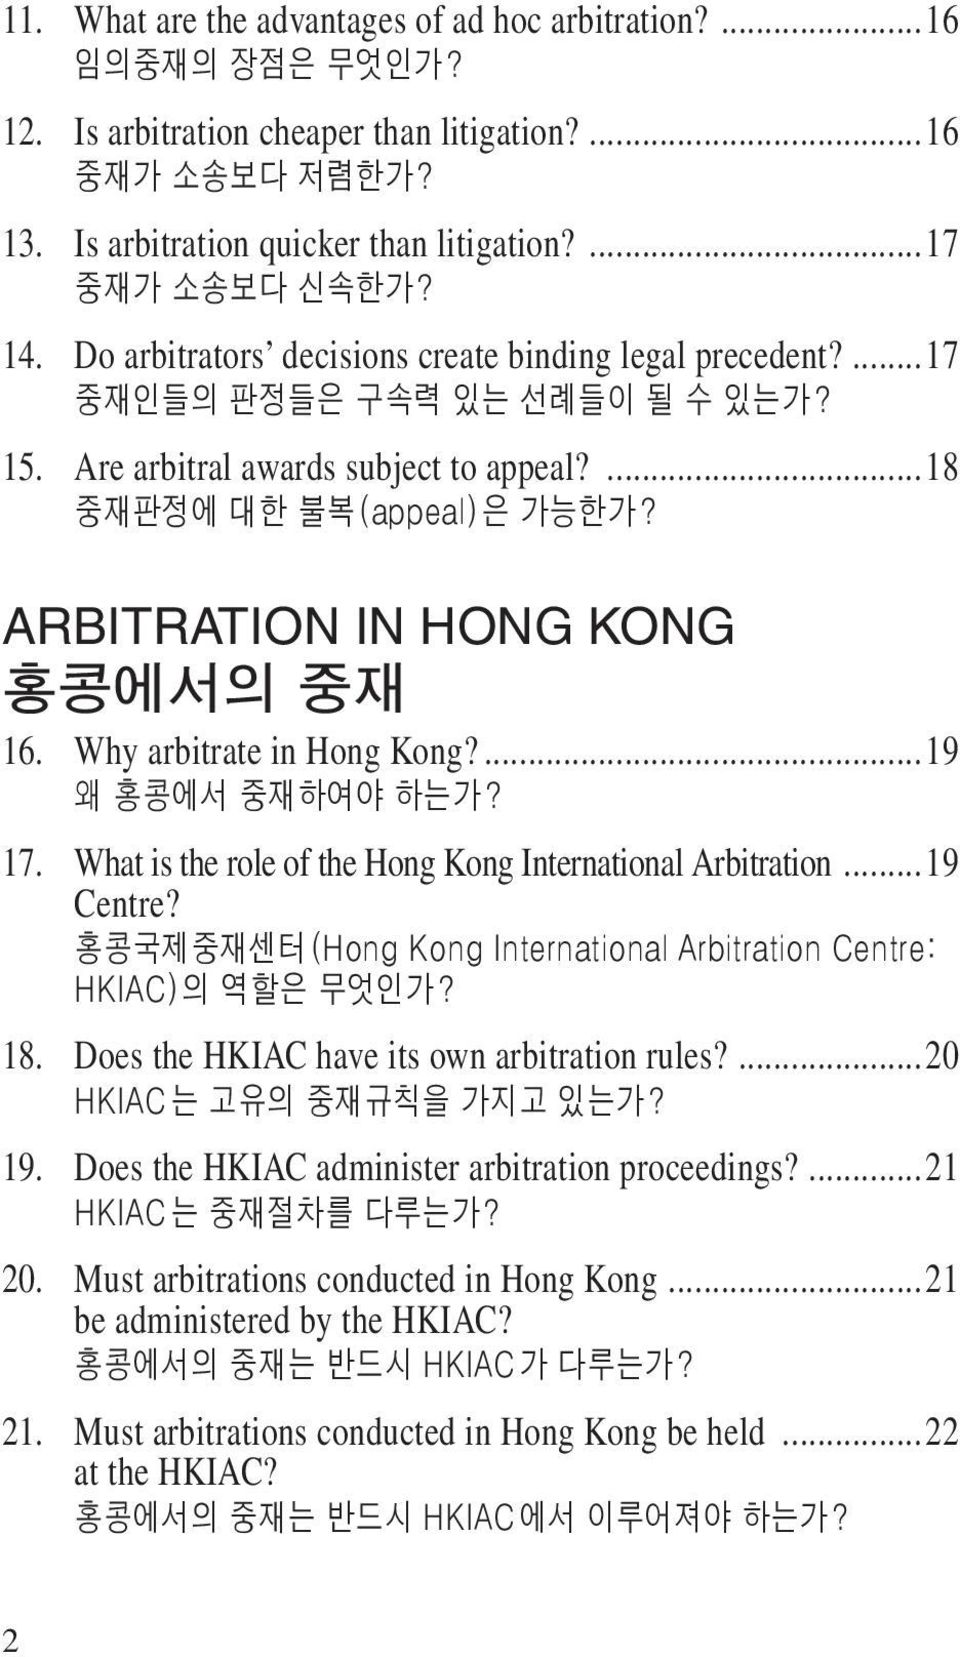 Arbitration in Hong Kong 홍콩에서의 중재 16. Why arbitrate in Hong Kong?...19 왜 홍콩에서 중재하여야 하는가? 17. What is the role of the Hong Kong International Arbitration...19 Centre?